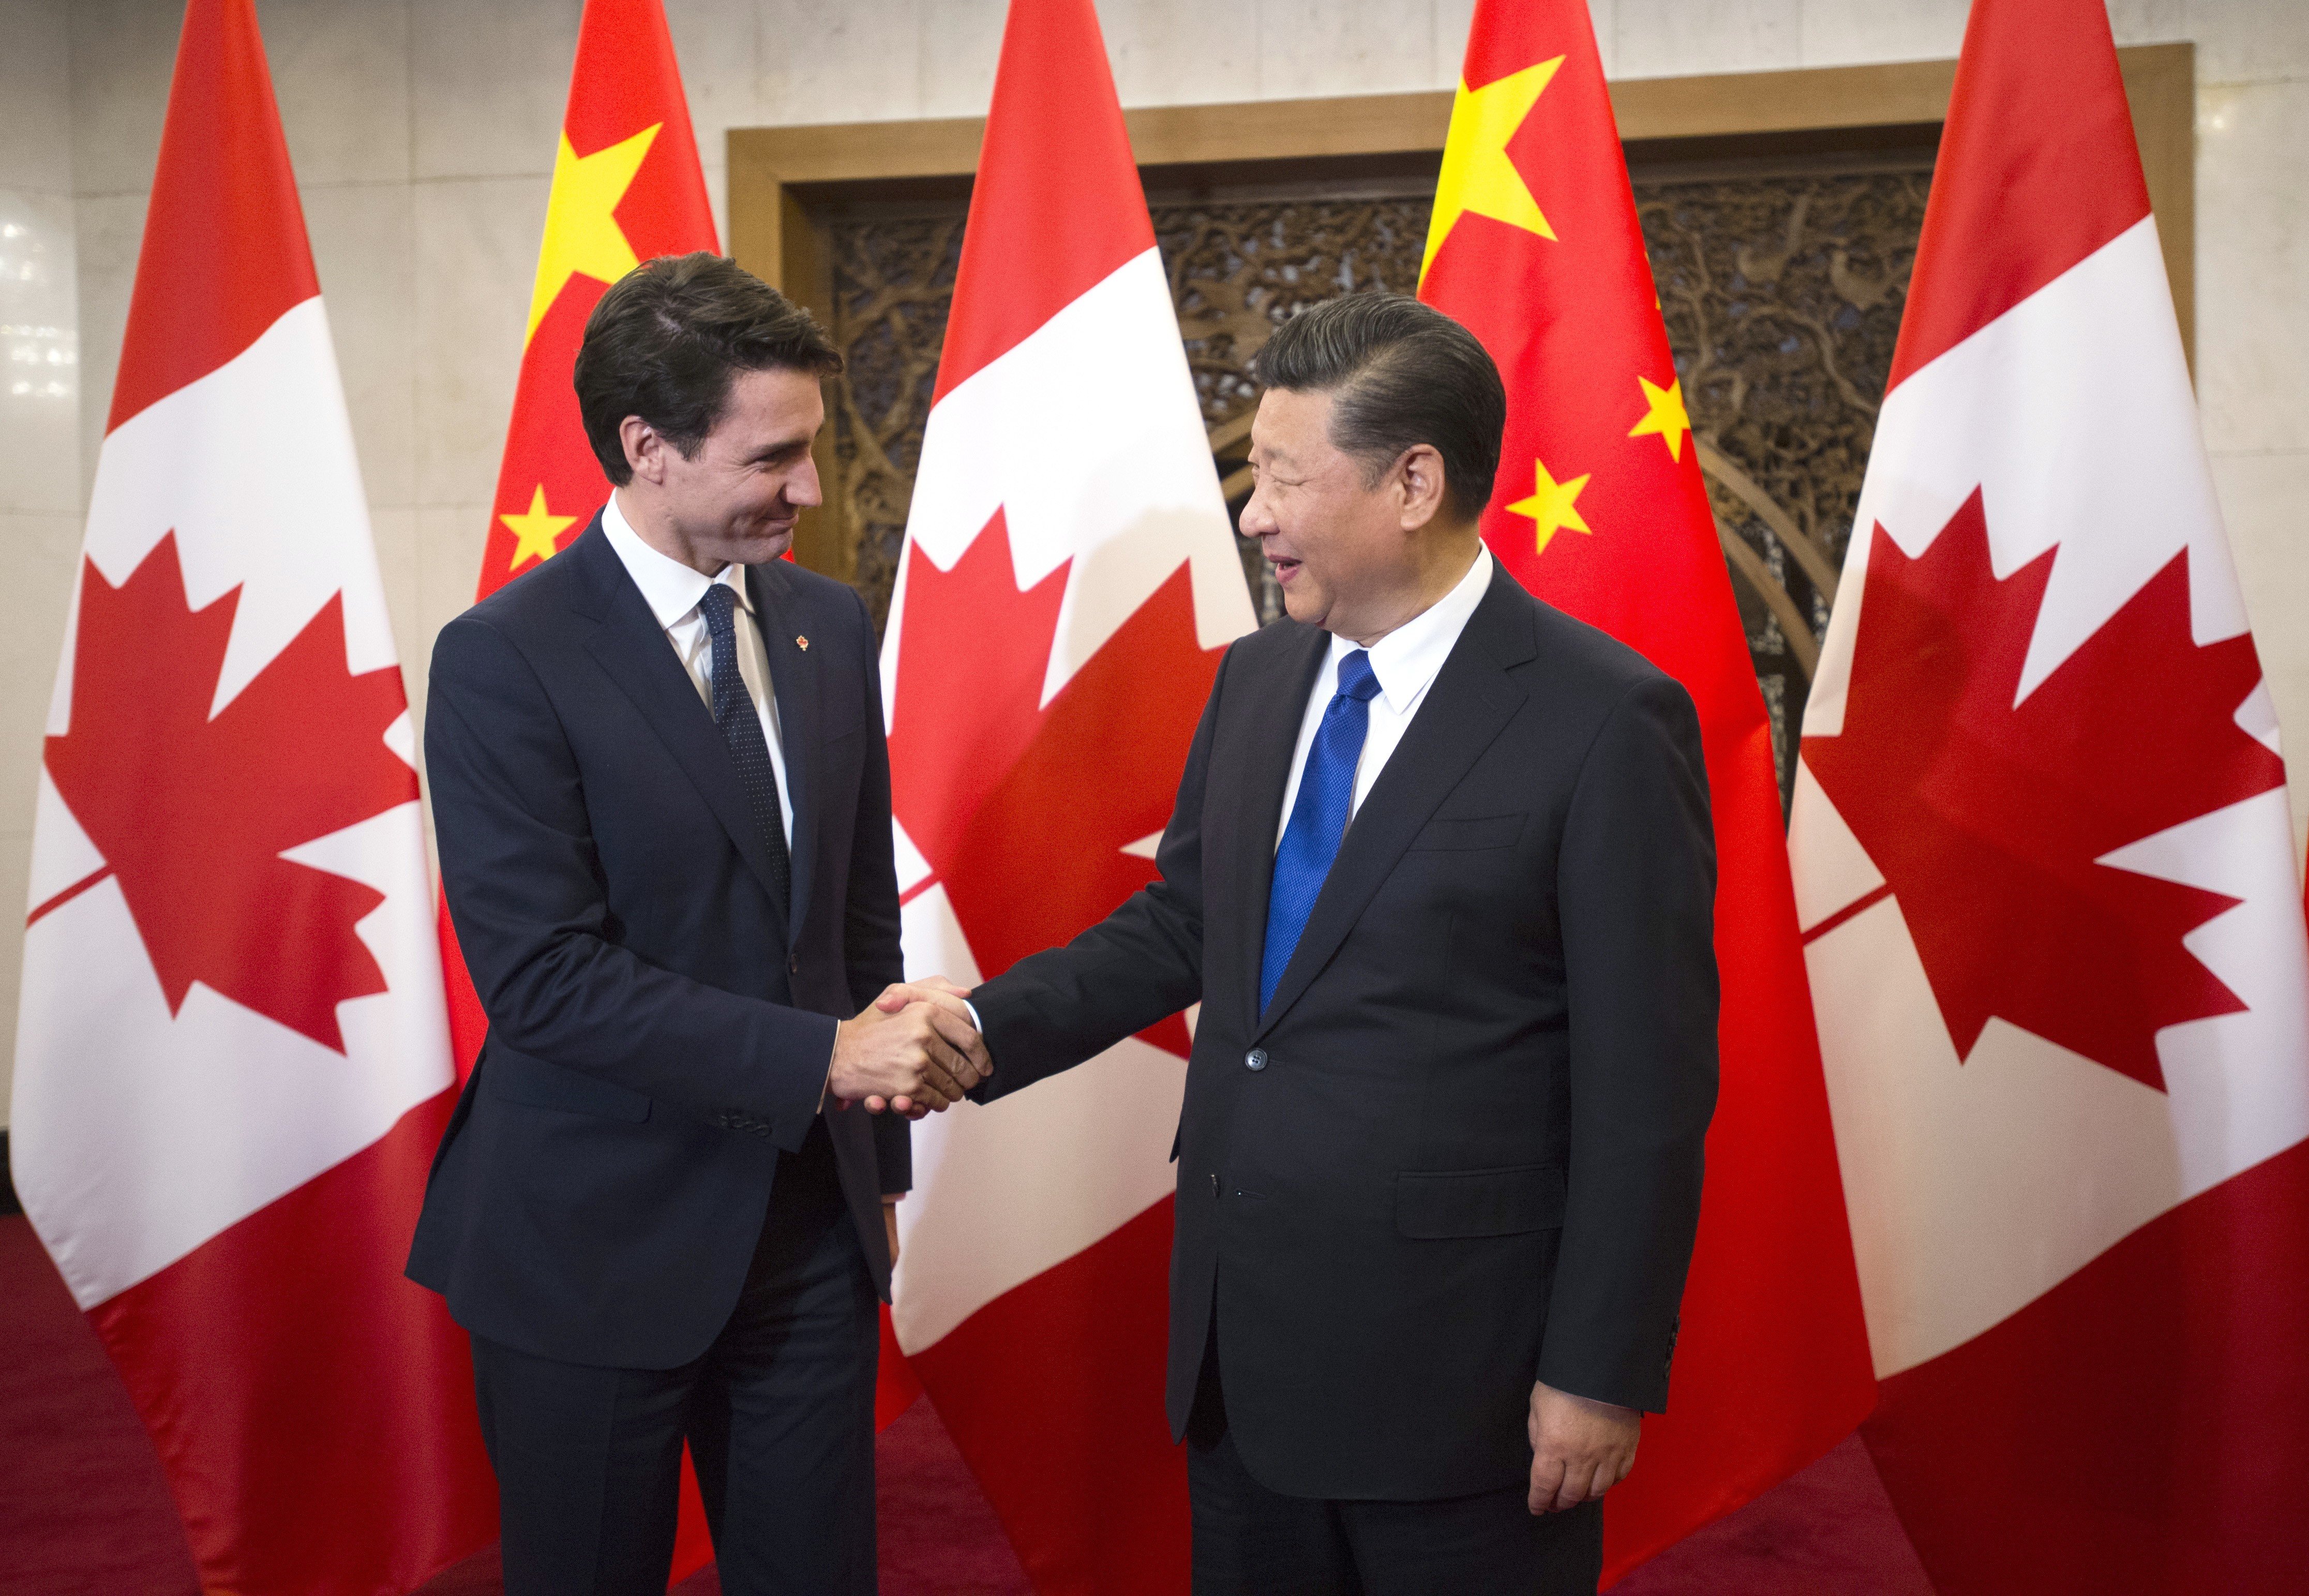 China, Canada need 'political trust' to build stable trade ties, Xi Jinping tells Justin Trudeau | South China Morning Post